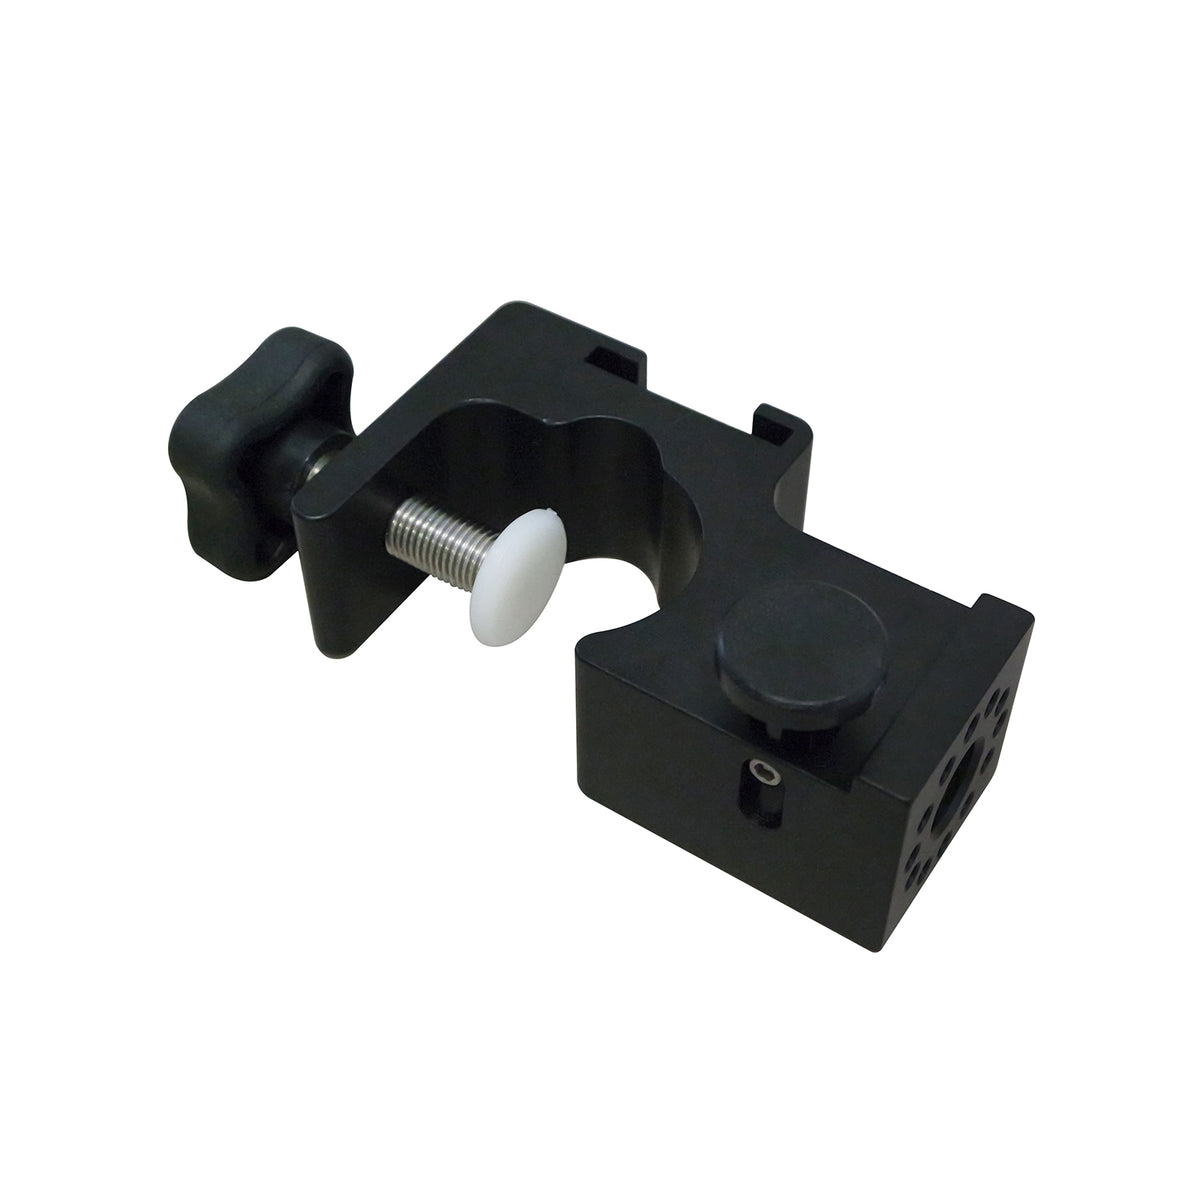 SECO Pole Bracket with Battery Slot and Quick Release -Brackets, Cradles & Pole Clamps- eGPS Solutions Inc.